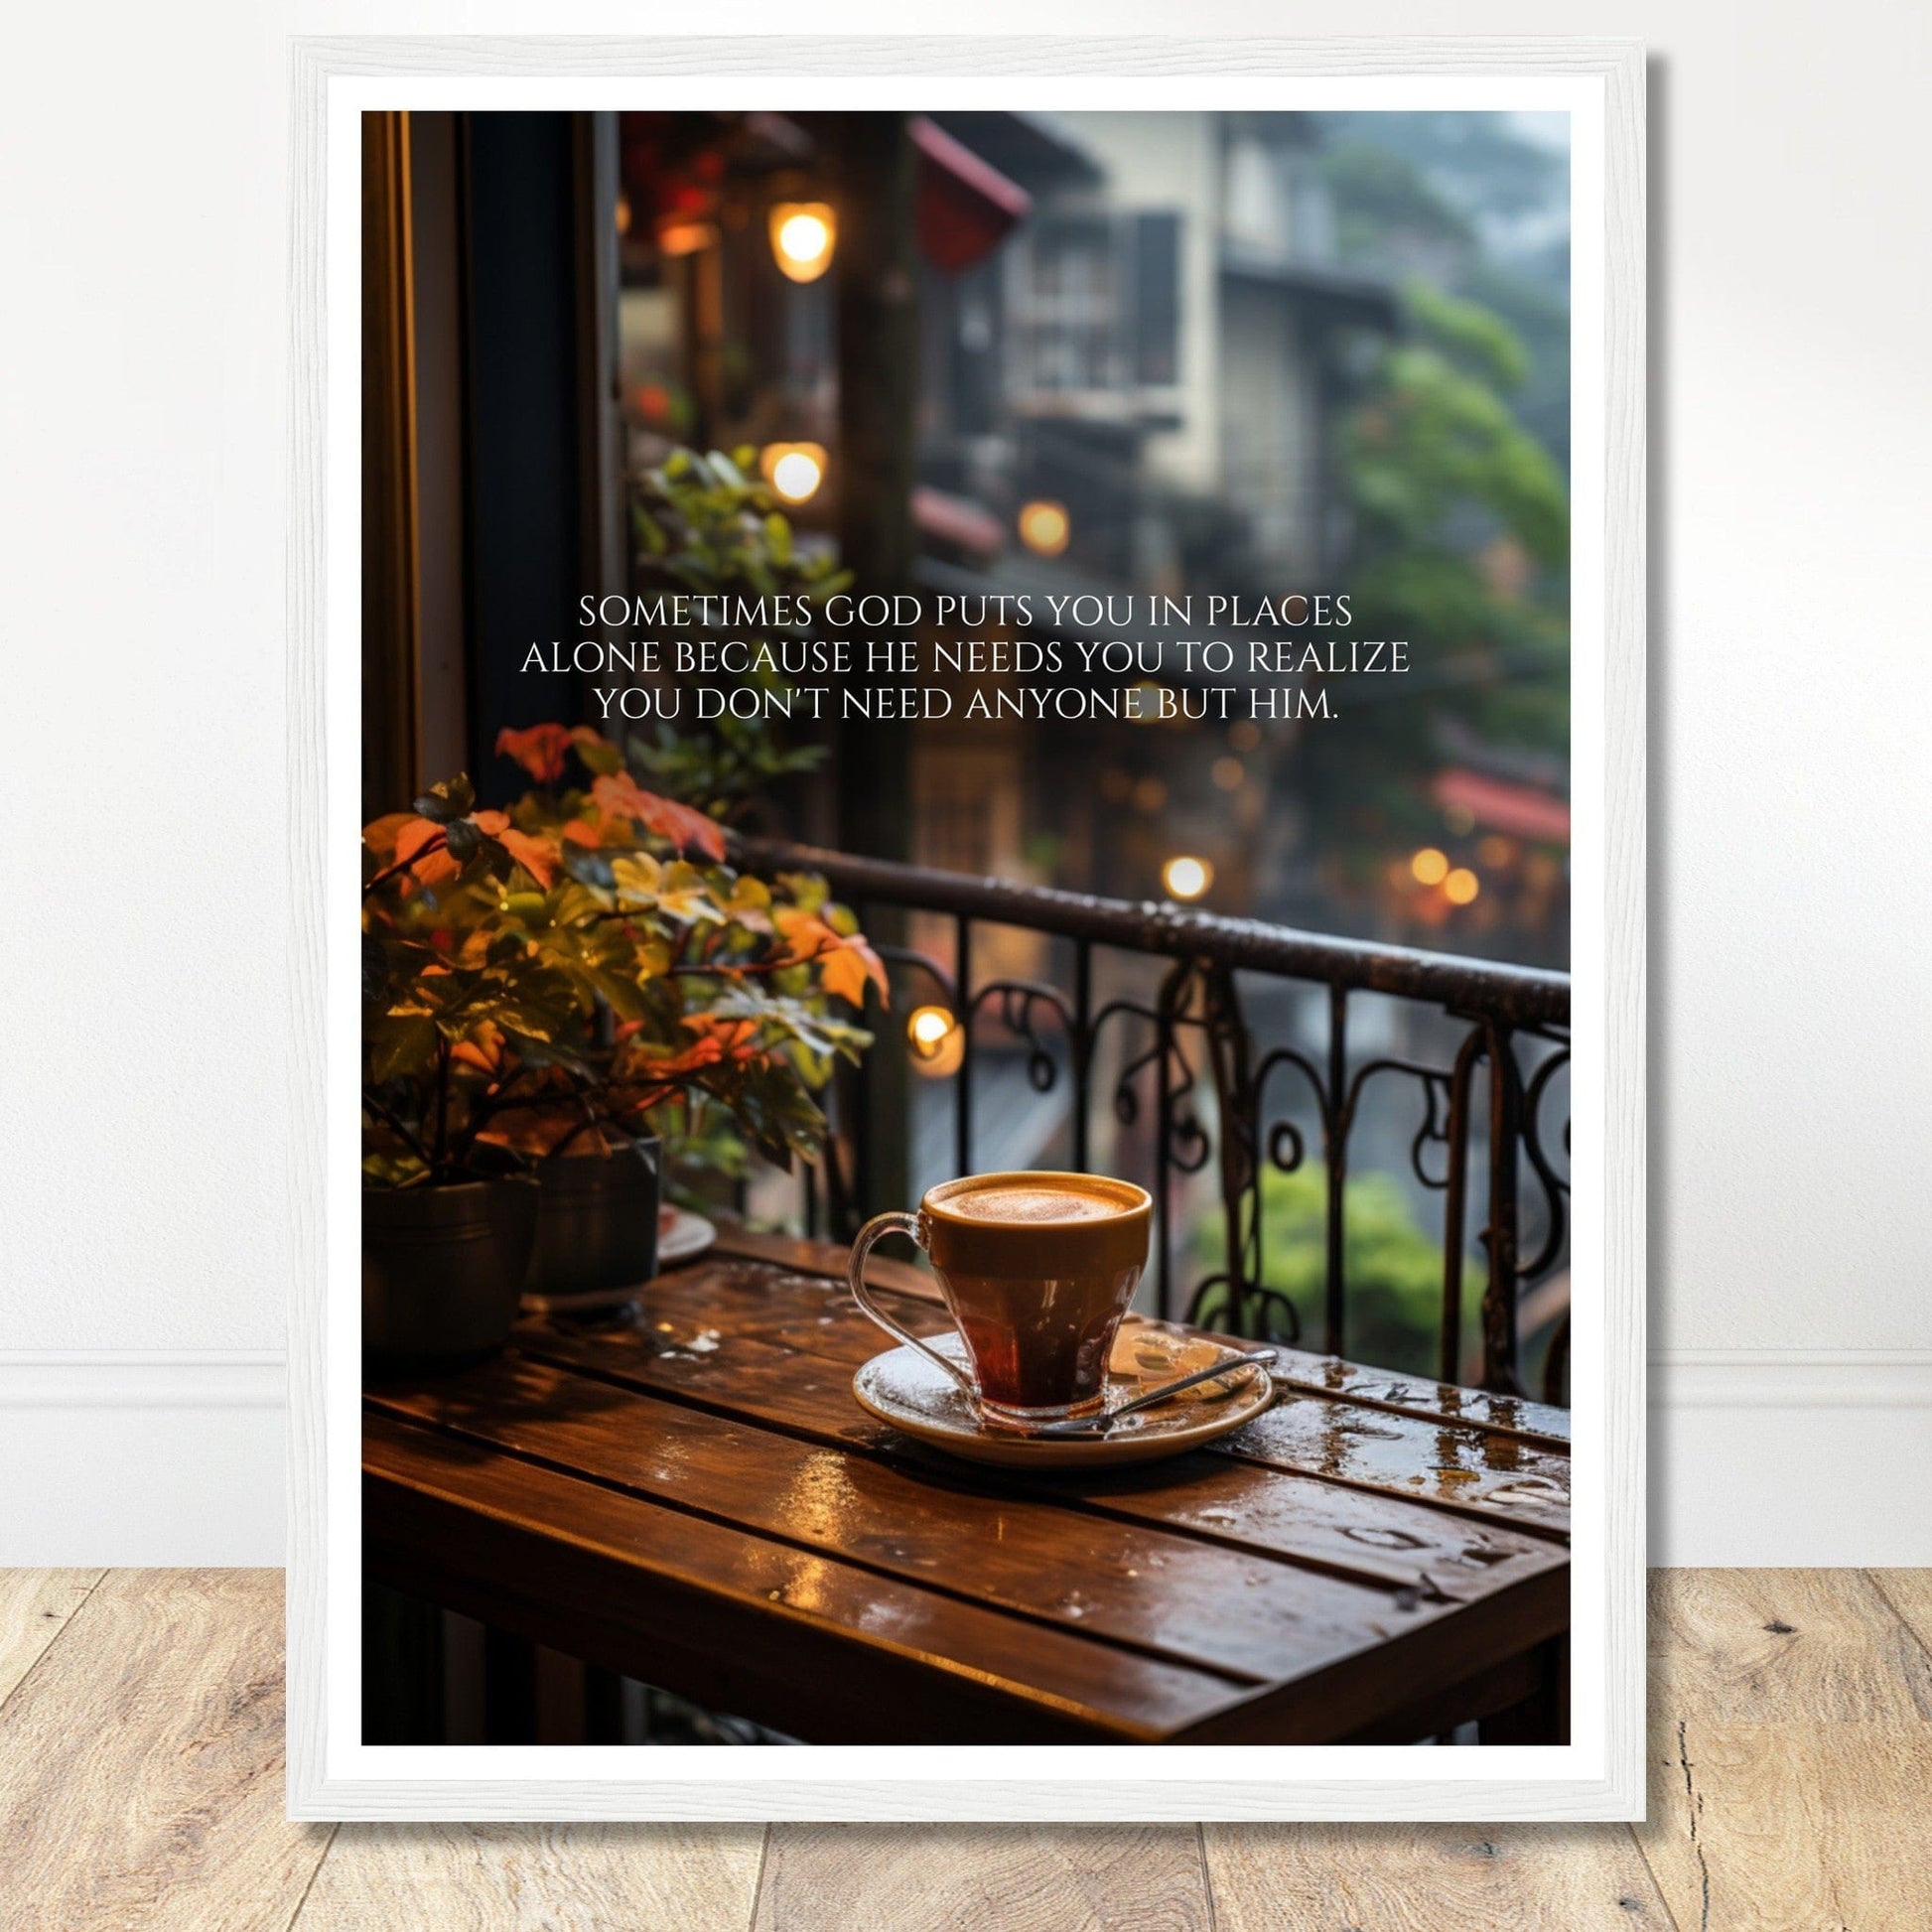 Coffee With My Father Print Material 45x60 cm / 18x24″ / White frame Premium Matte Paper Wooden Framed Poster